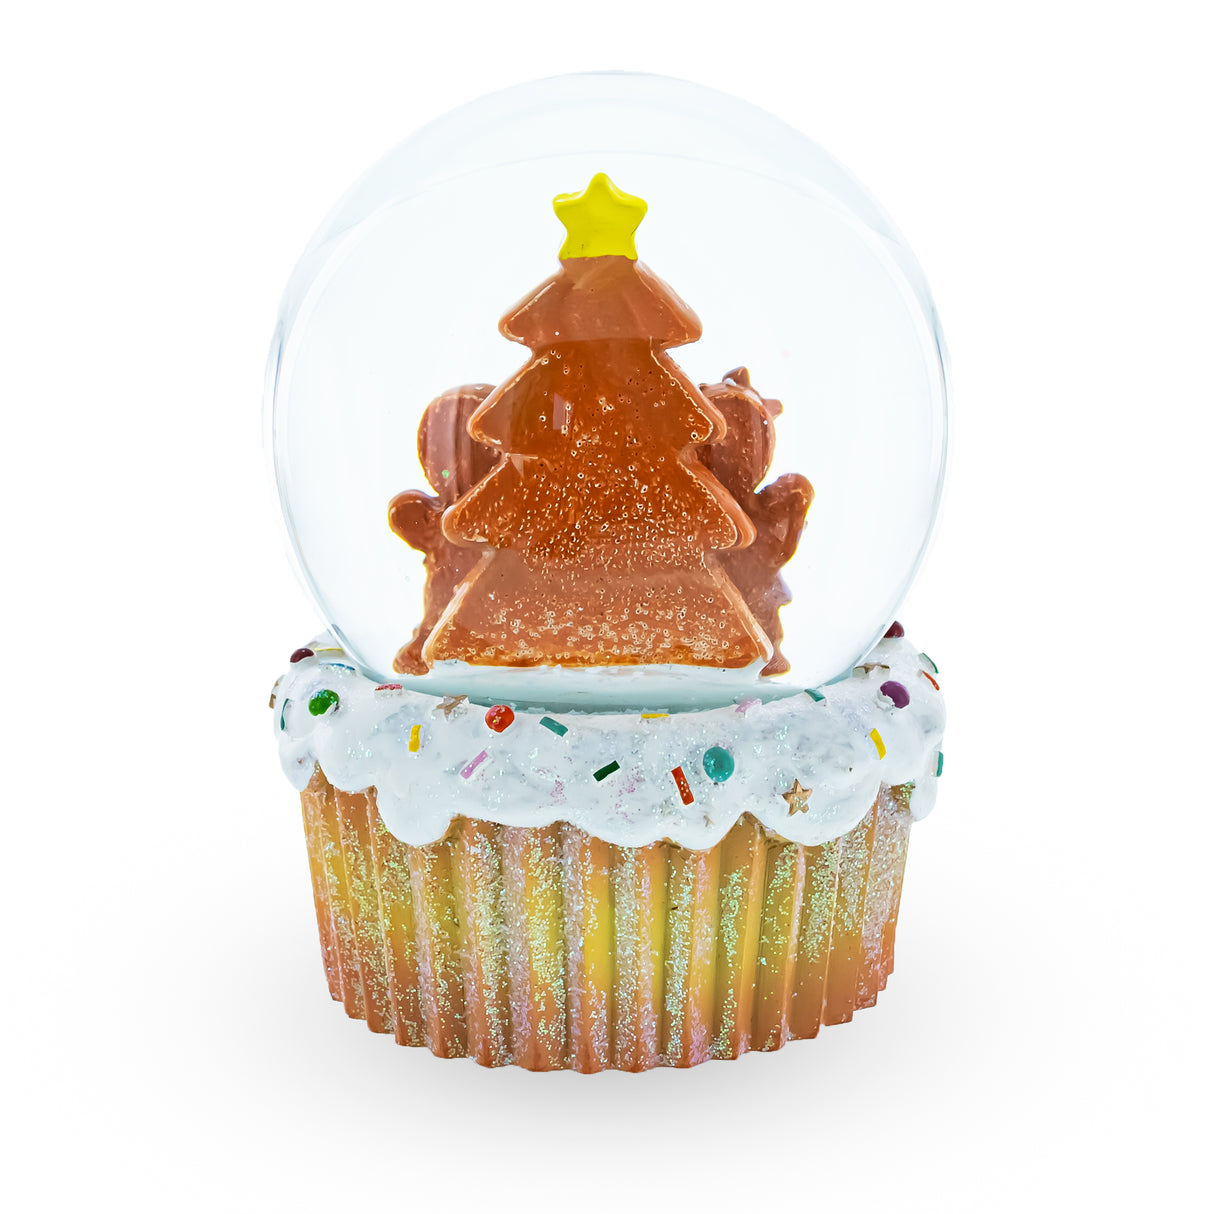 Sweet Gingerbread Harmony: Musical Christmas Water Globe with Gingerbread Family and Cupcake ,dimensions in inches: 5.6 x 3.8 x 3.8